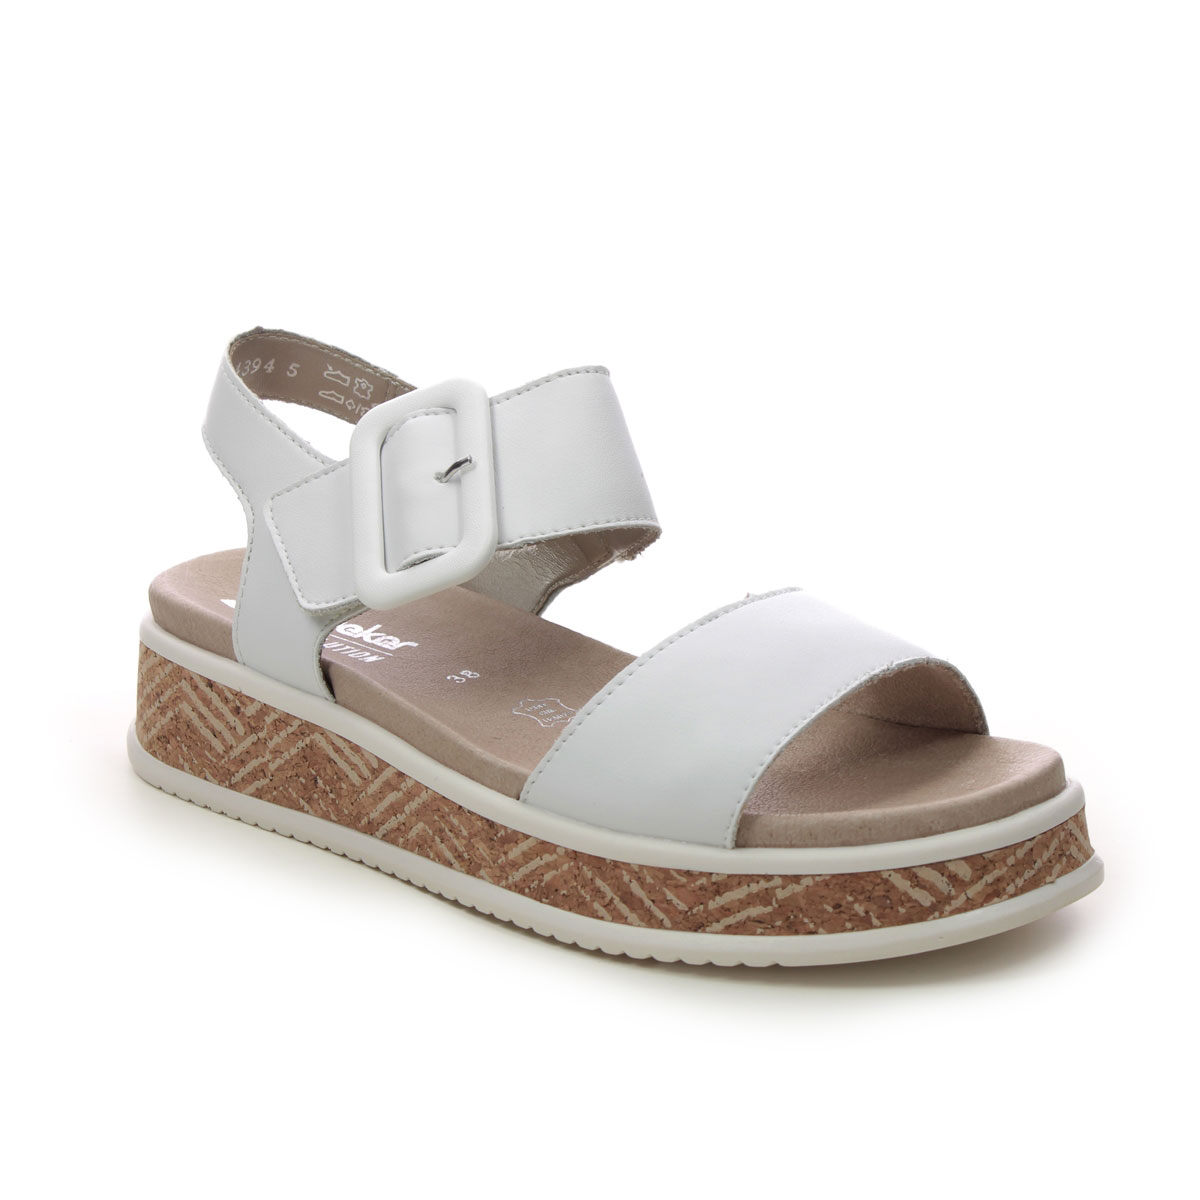 Rieker W0800-80 WHITE LEATHER Womens Flat Sandals in a Plain Leather in Size 38